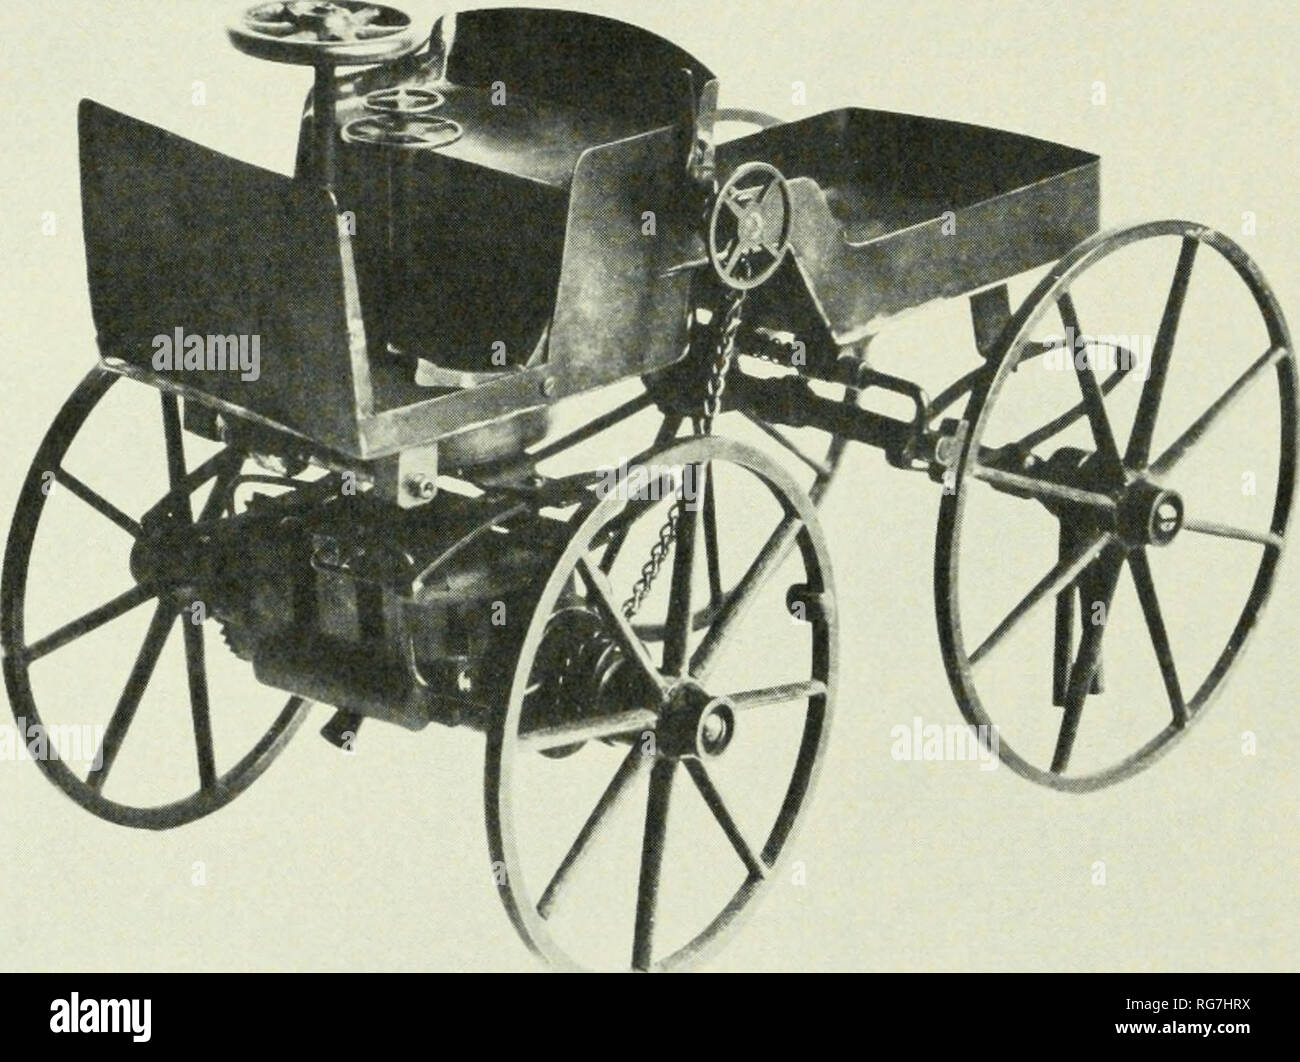 Bulletin - United States National Museum. Science. SELDEN GASOLINE AUTOMOBILE, 1879 Transferred from the U. S. Patent Office in 1908 (USNM 252678) George B. Selden, patent attorney and inventor of Rochester,